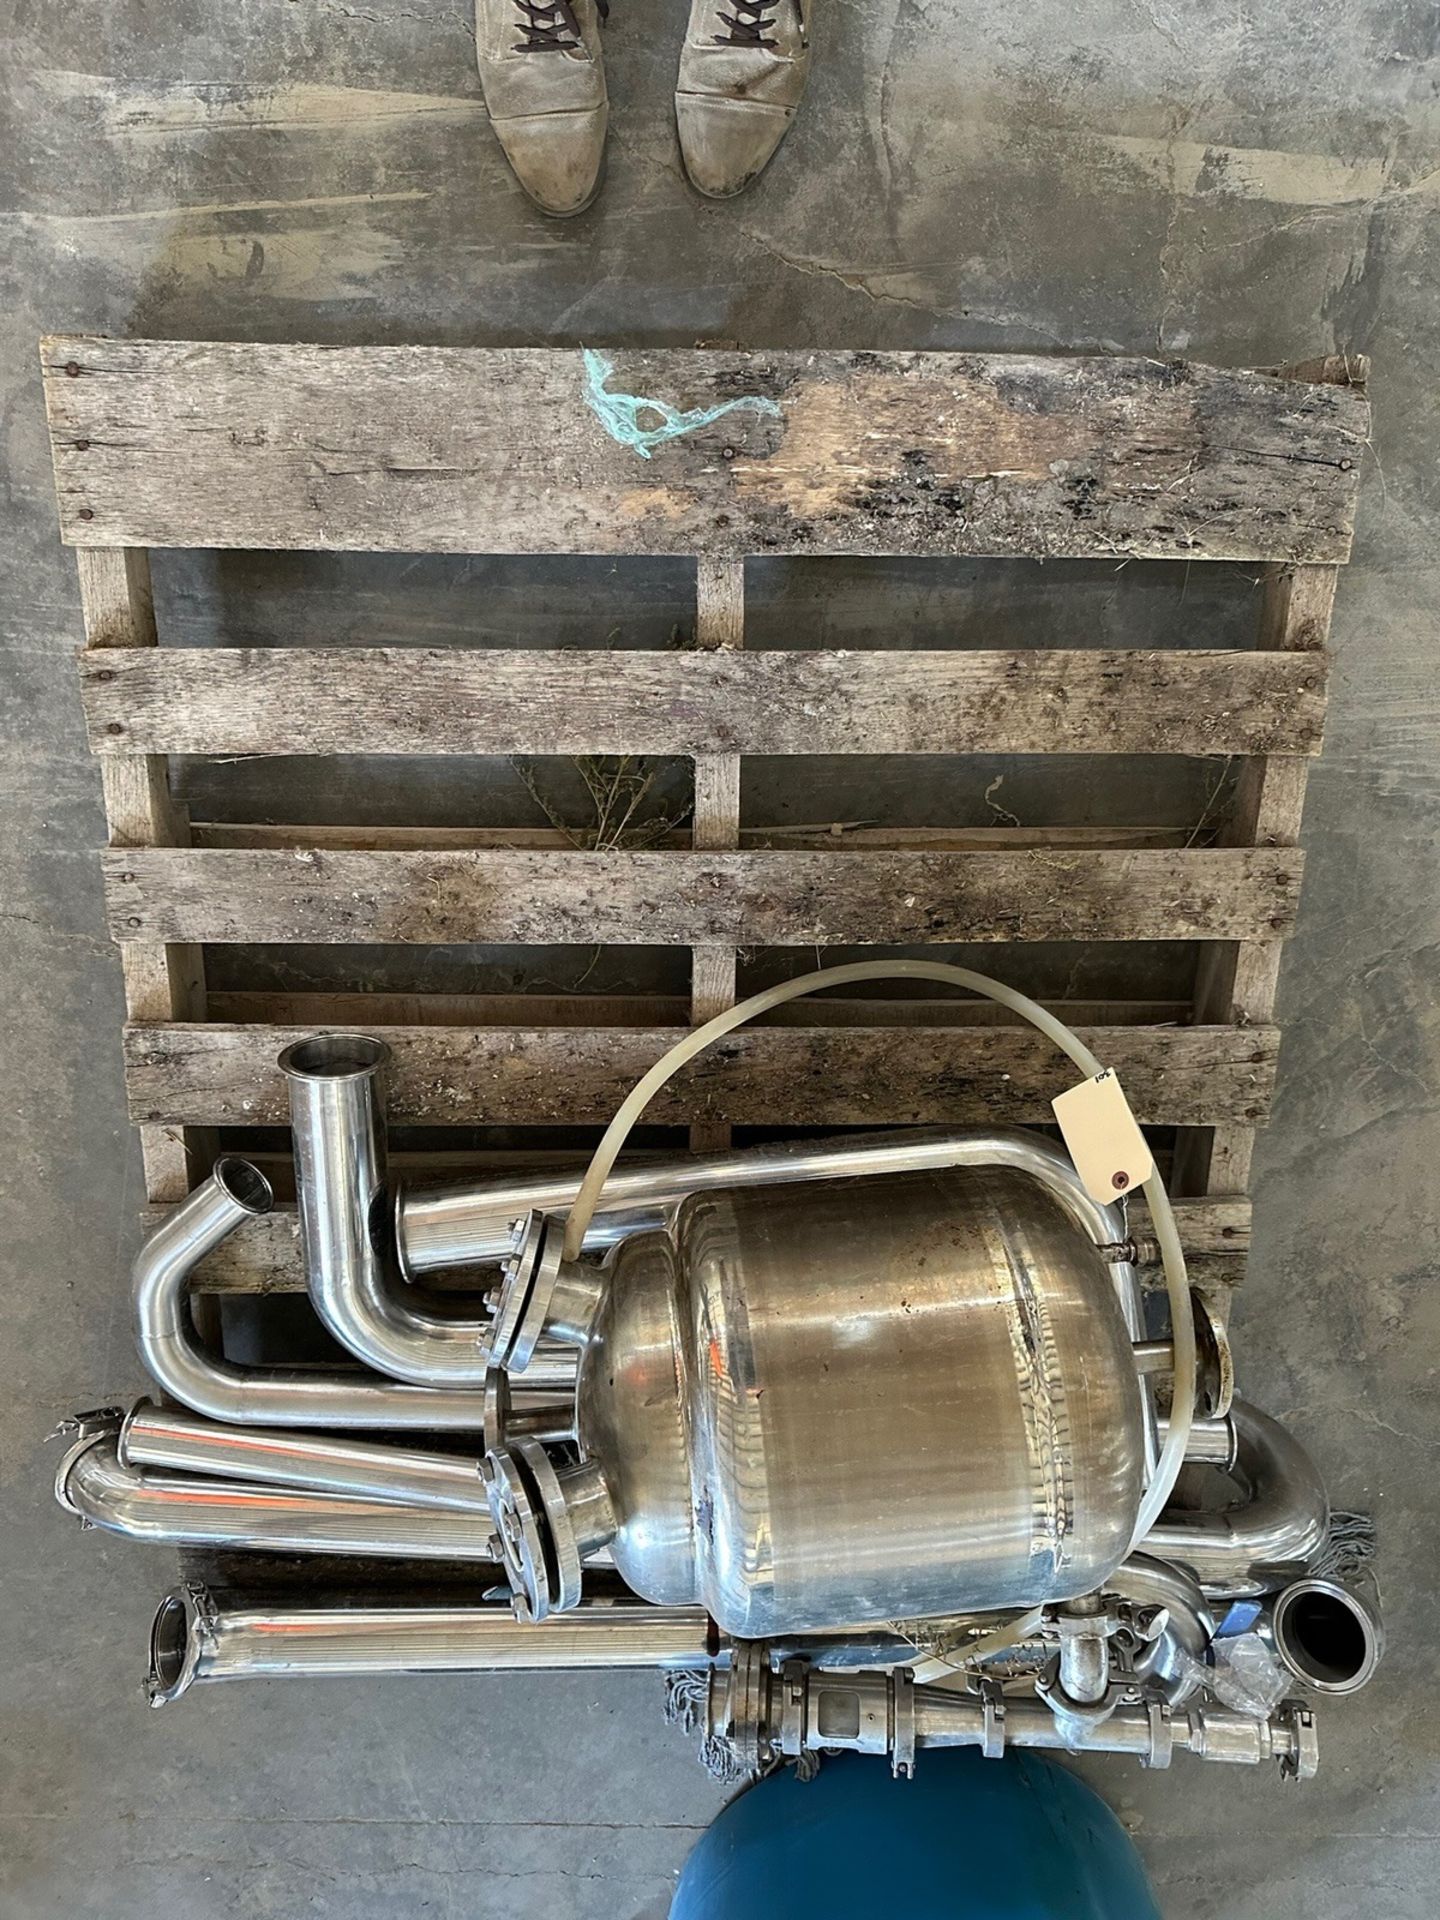 Pressure Vessel With Piping | Rig Fee $35 - Image 2 of 3